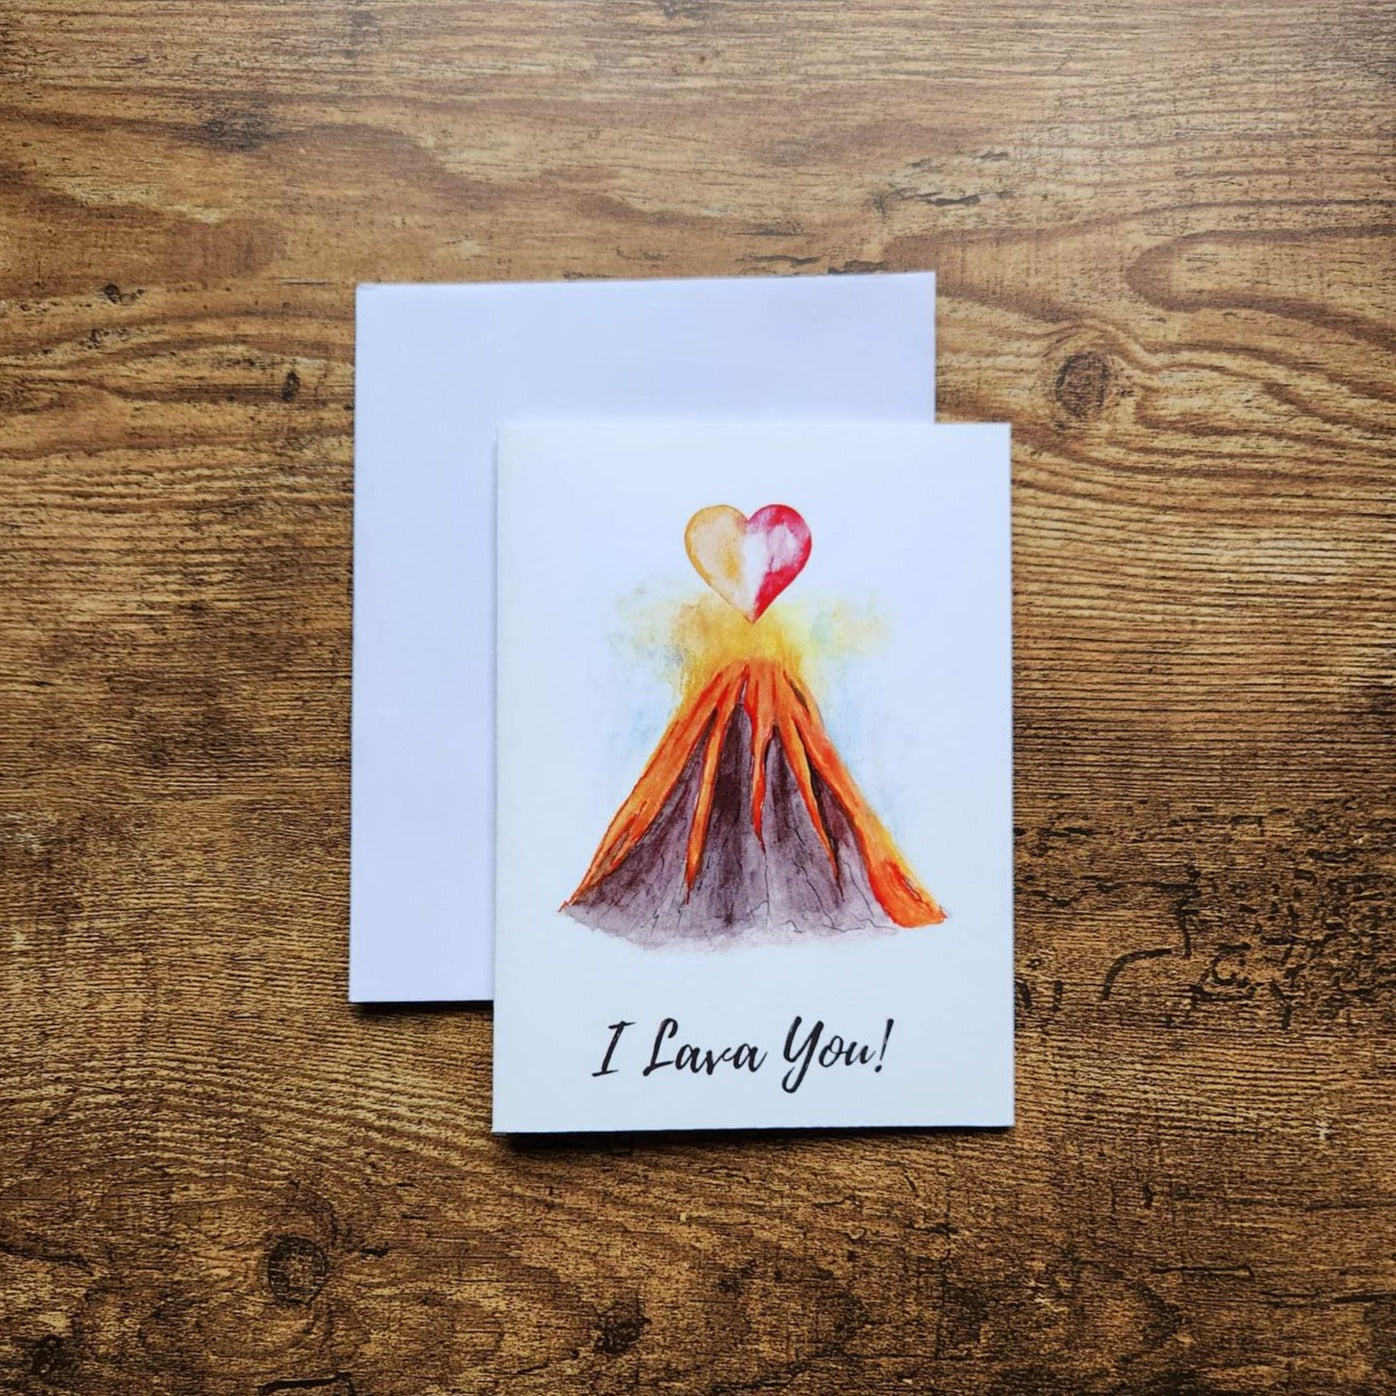 I lava you, I love you card, Lava pun card, Cute Valentine's day card, Sweet anniversary card, Volcano card, Card for Wife,Card for husband